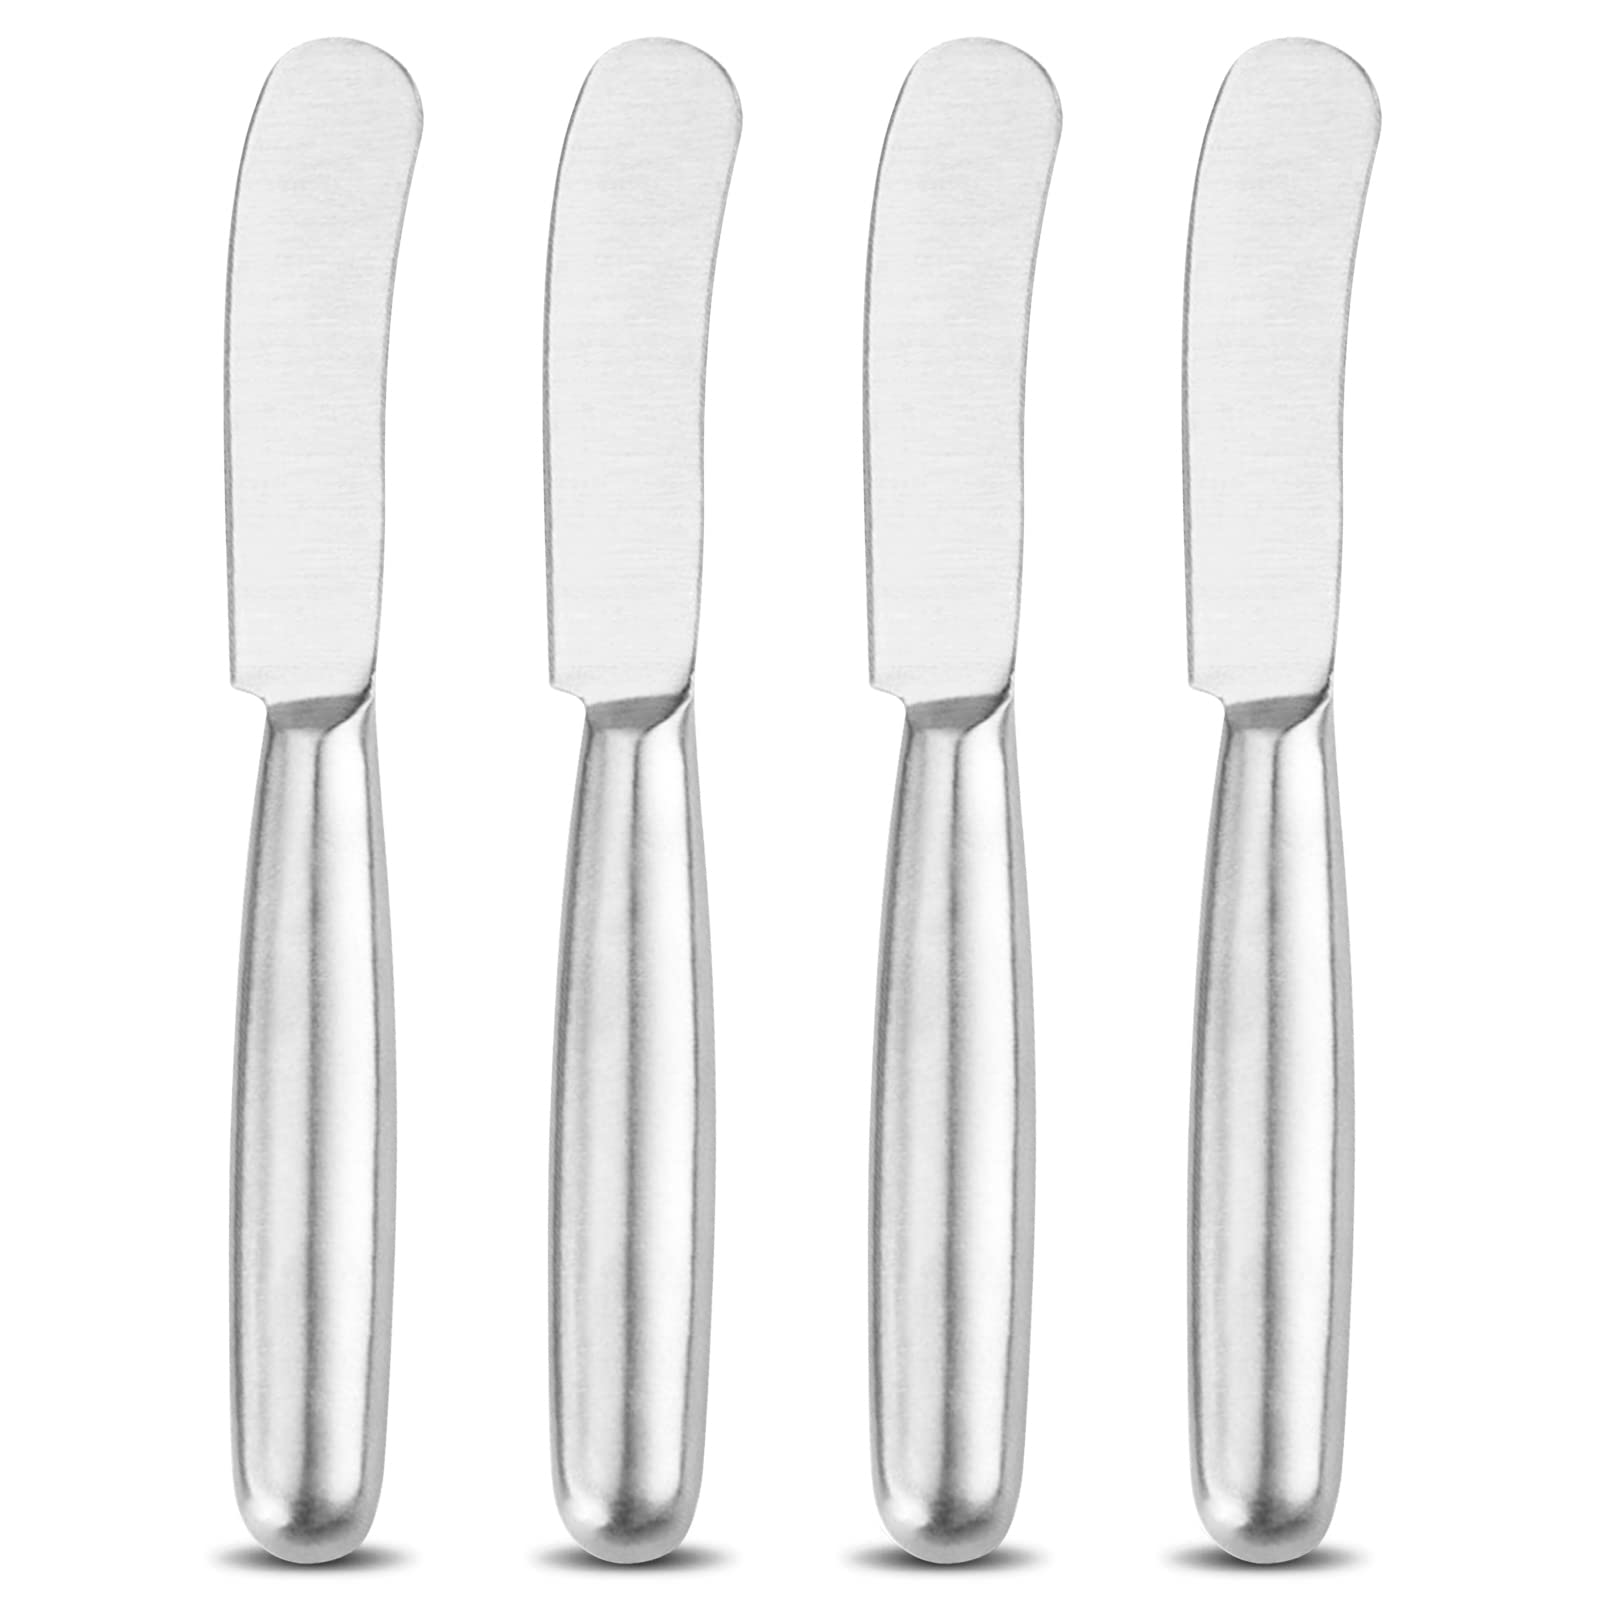 VANRA Spreader Knife Set 4-Piece Butter Knife Stainless Steel Cheese Knife Set for Jams and Cream 8.4-inch